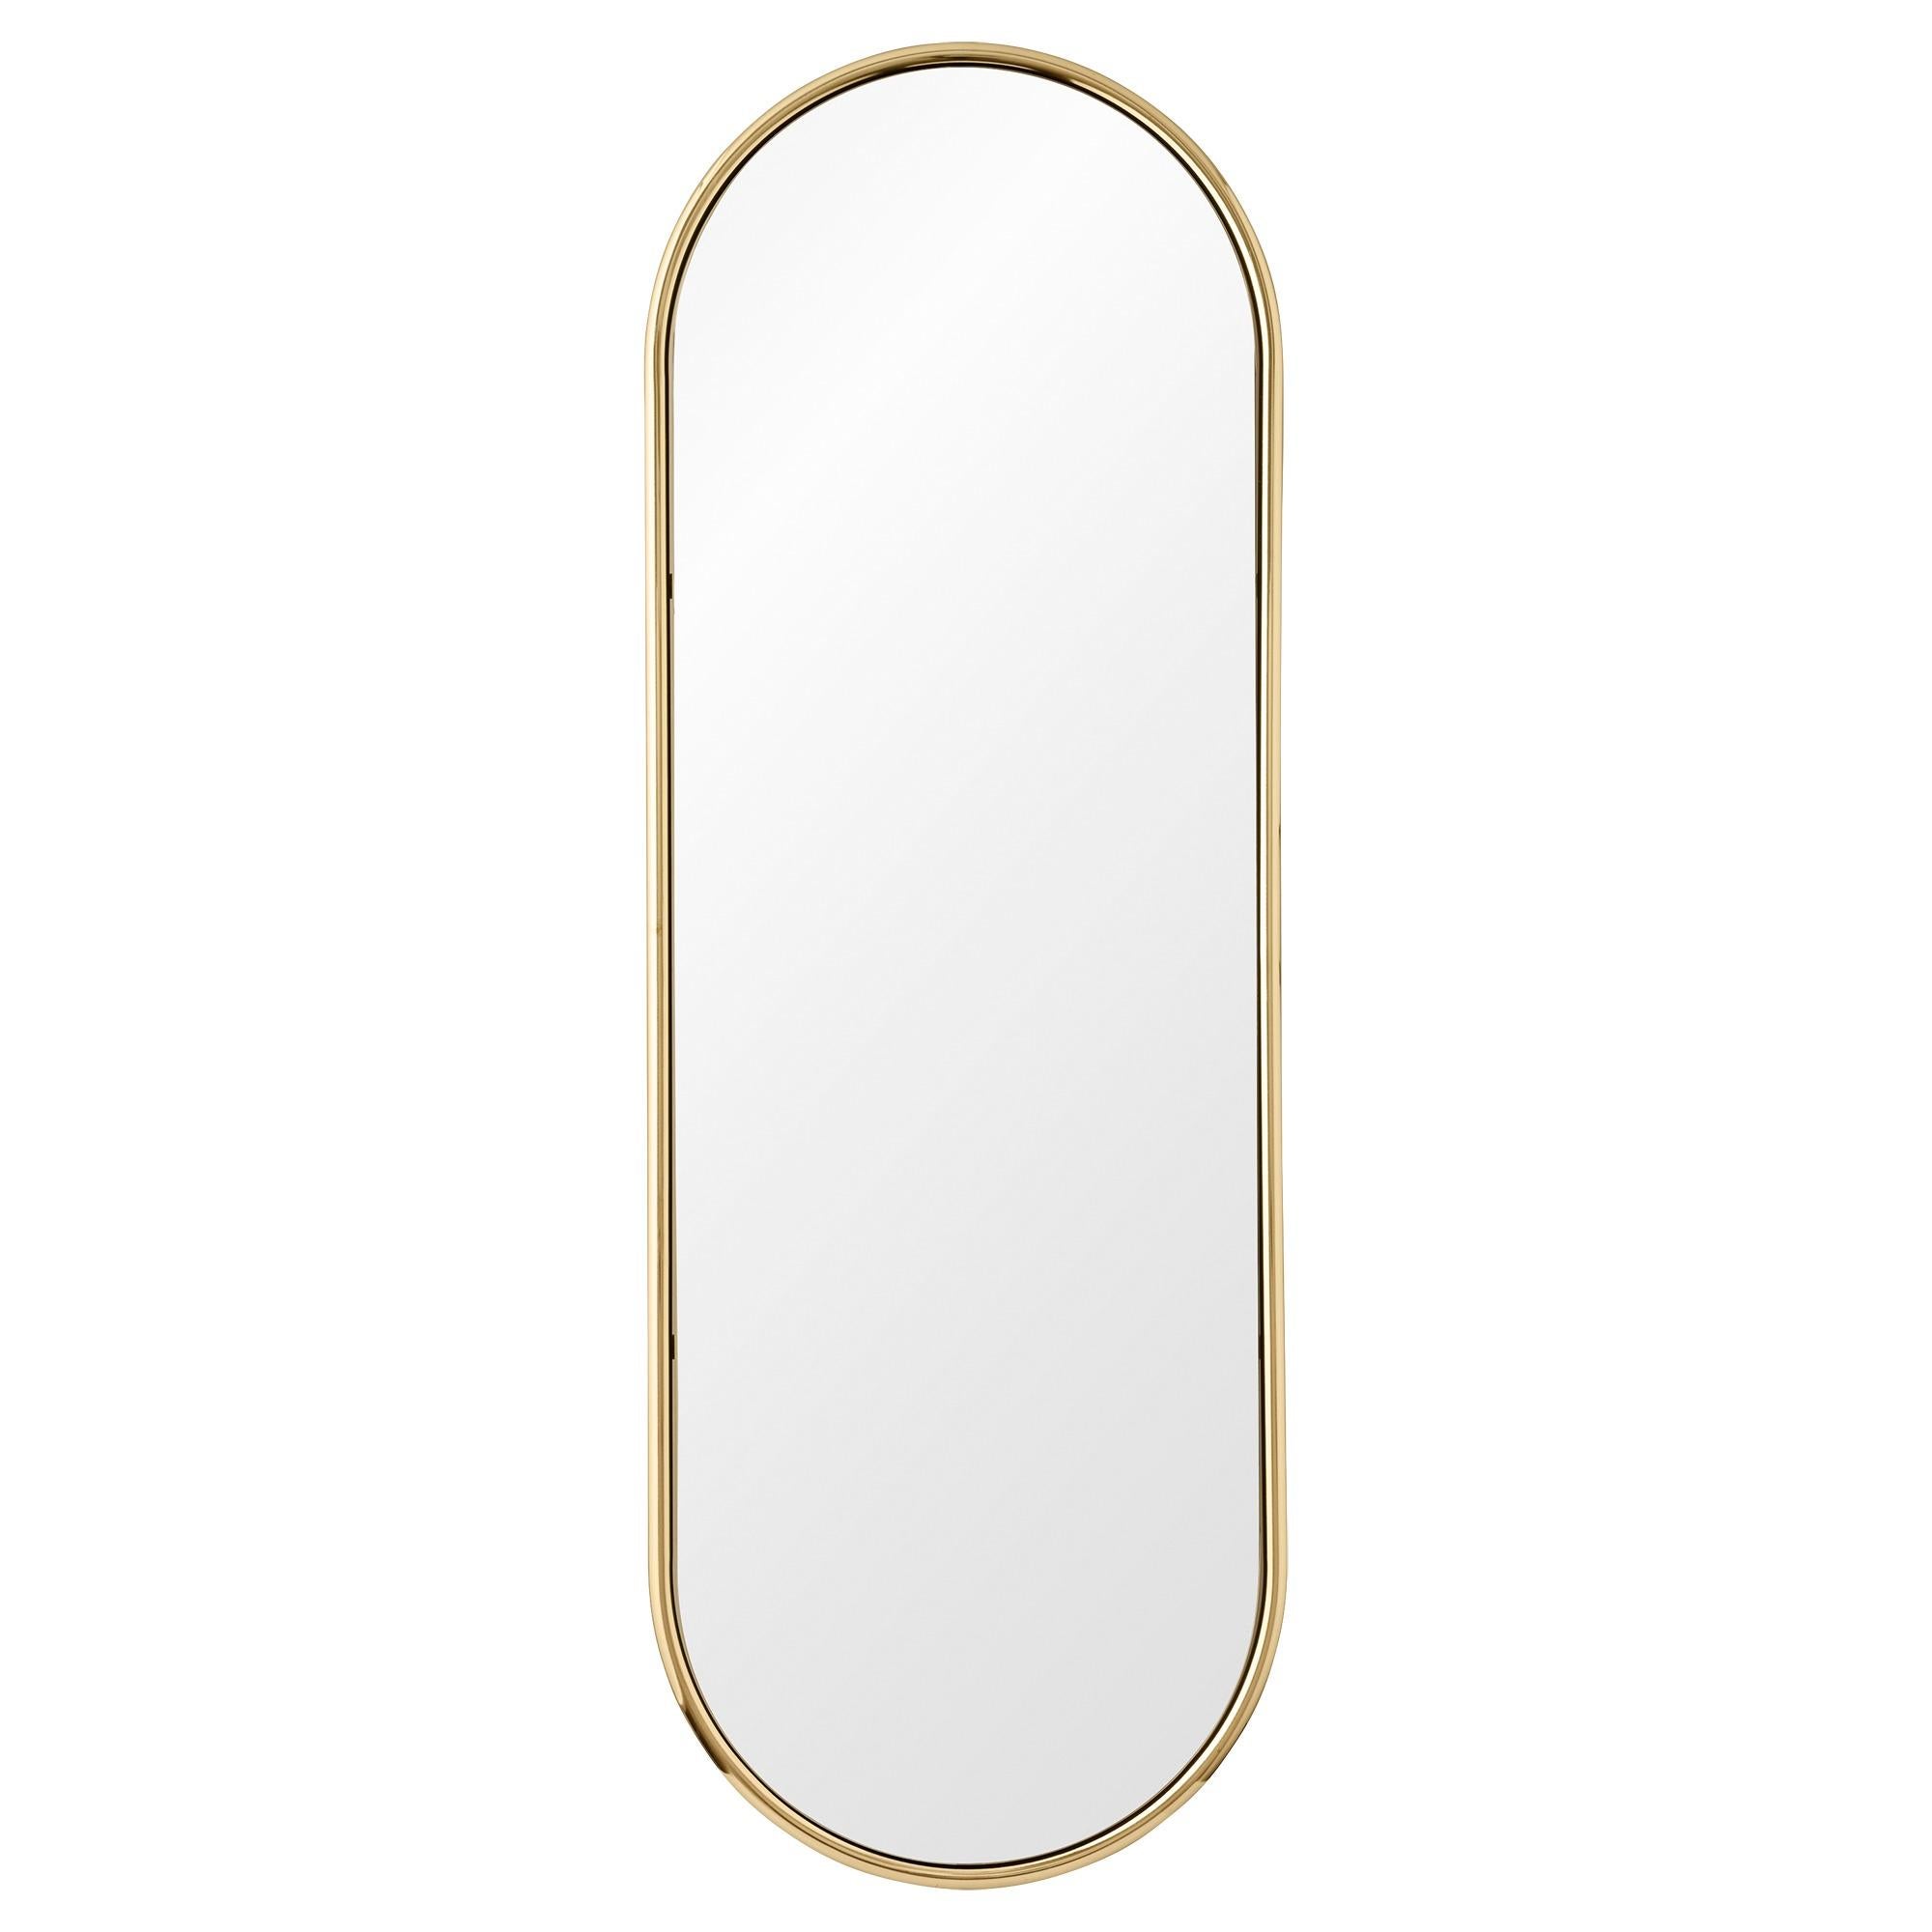 Angui golden wardrobe mirror by AYTM
Dimensions: 50 x 22 x 145 cm
Materials: Glass, copper, MDF

The Angui mirror with its simple pipe-styled frame is a beauty for any bathroom, hallway, or maybe bedroom. Use a single one or add several